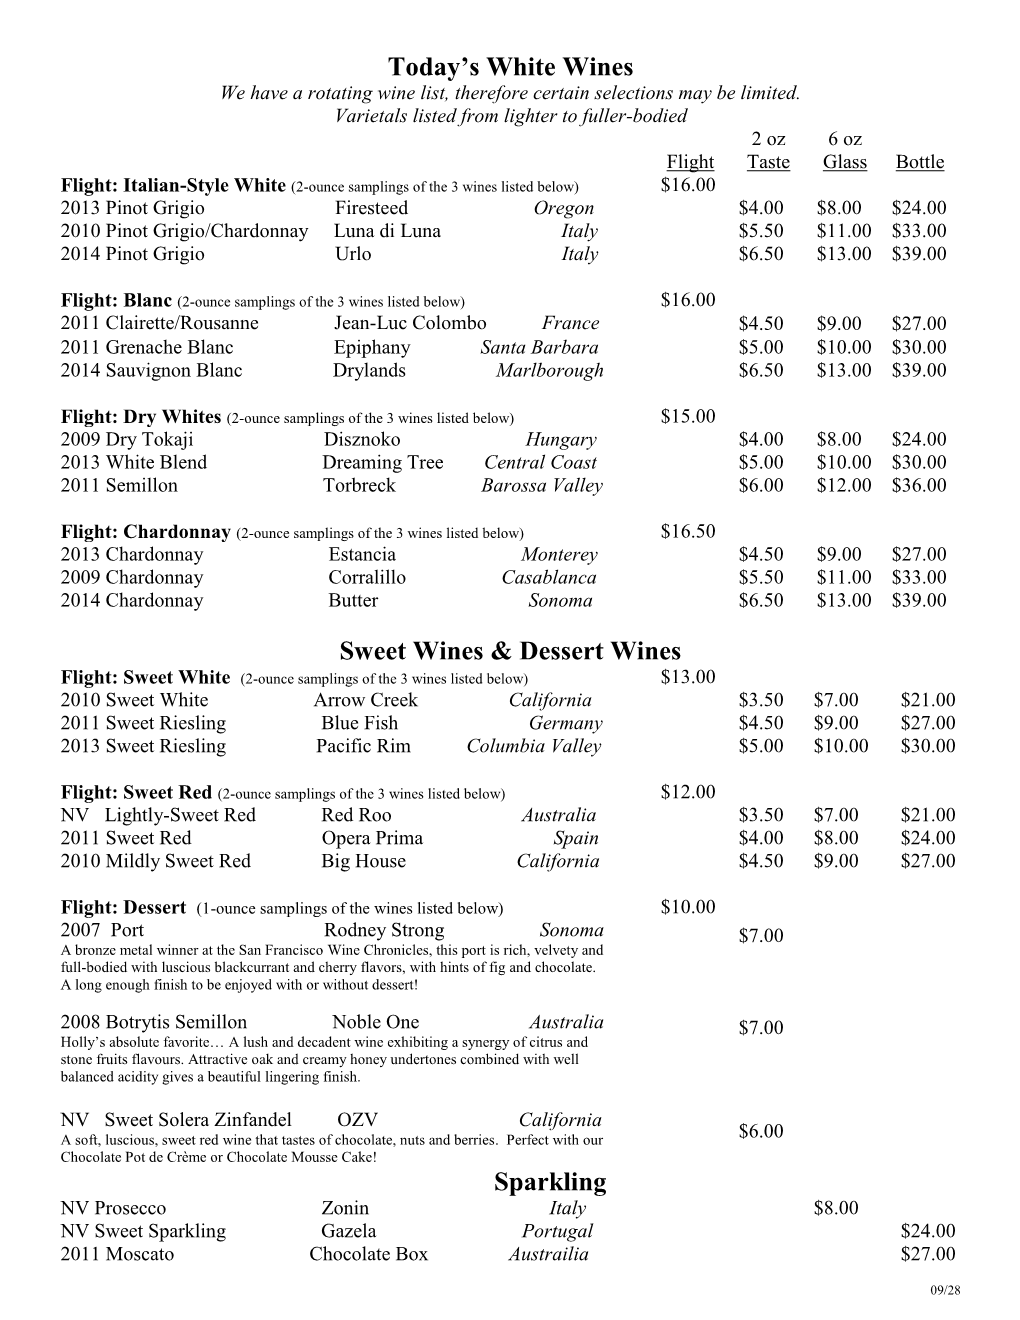 This Week's White Wines